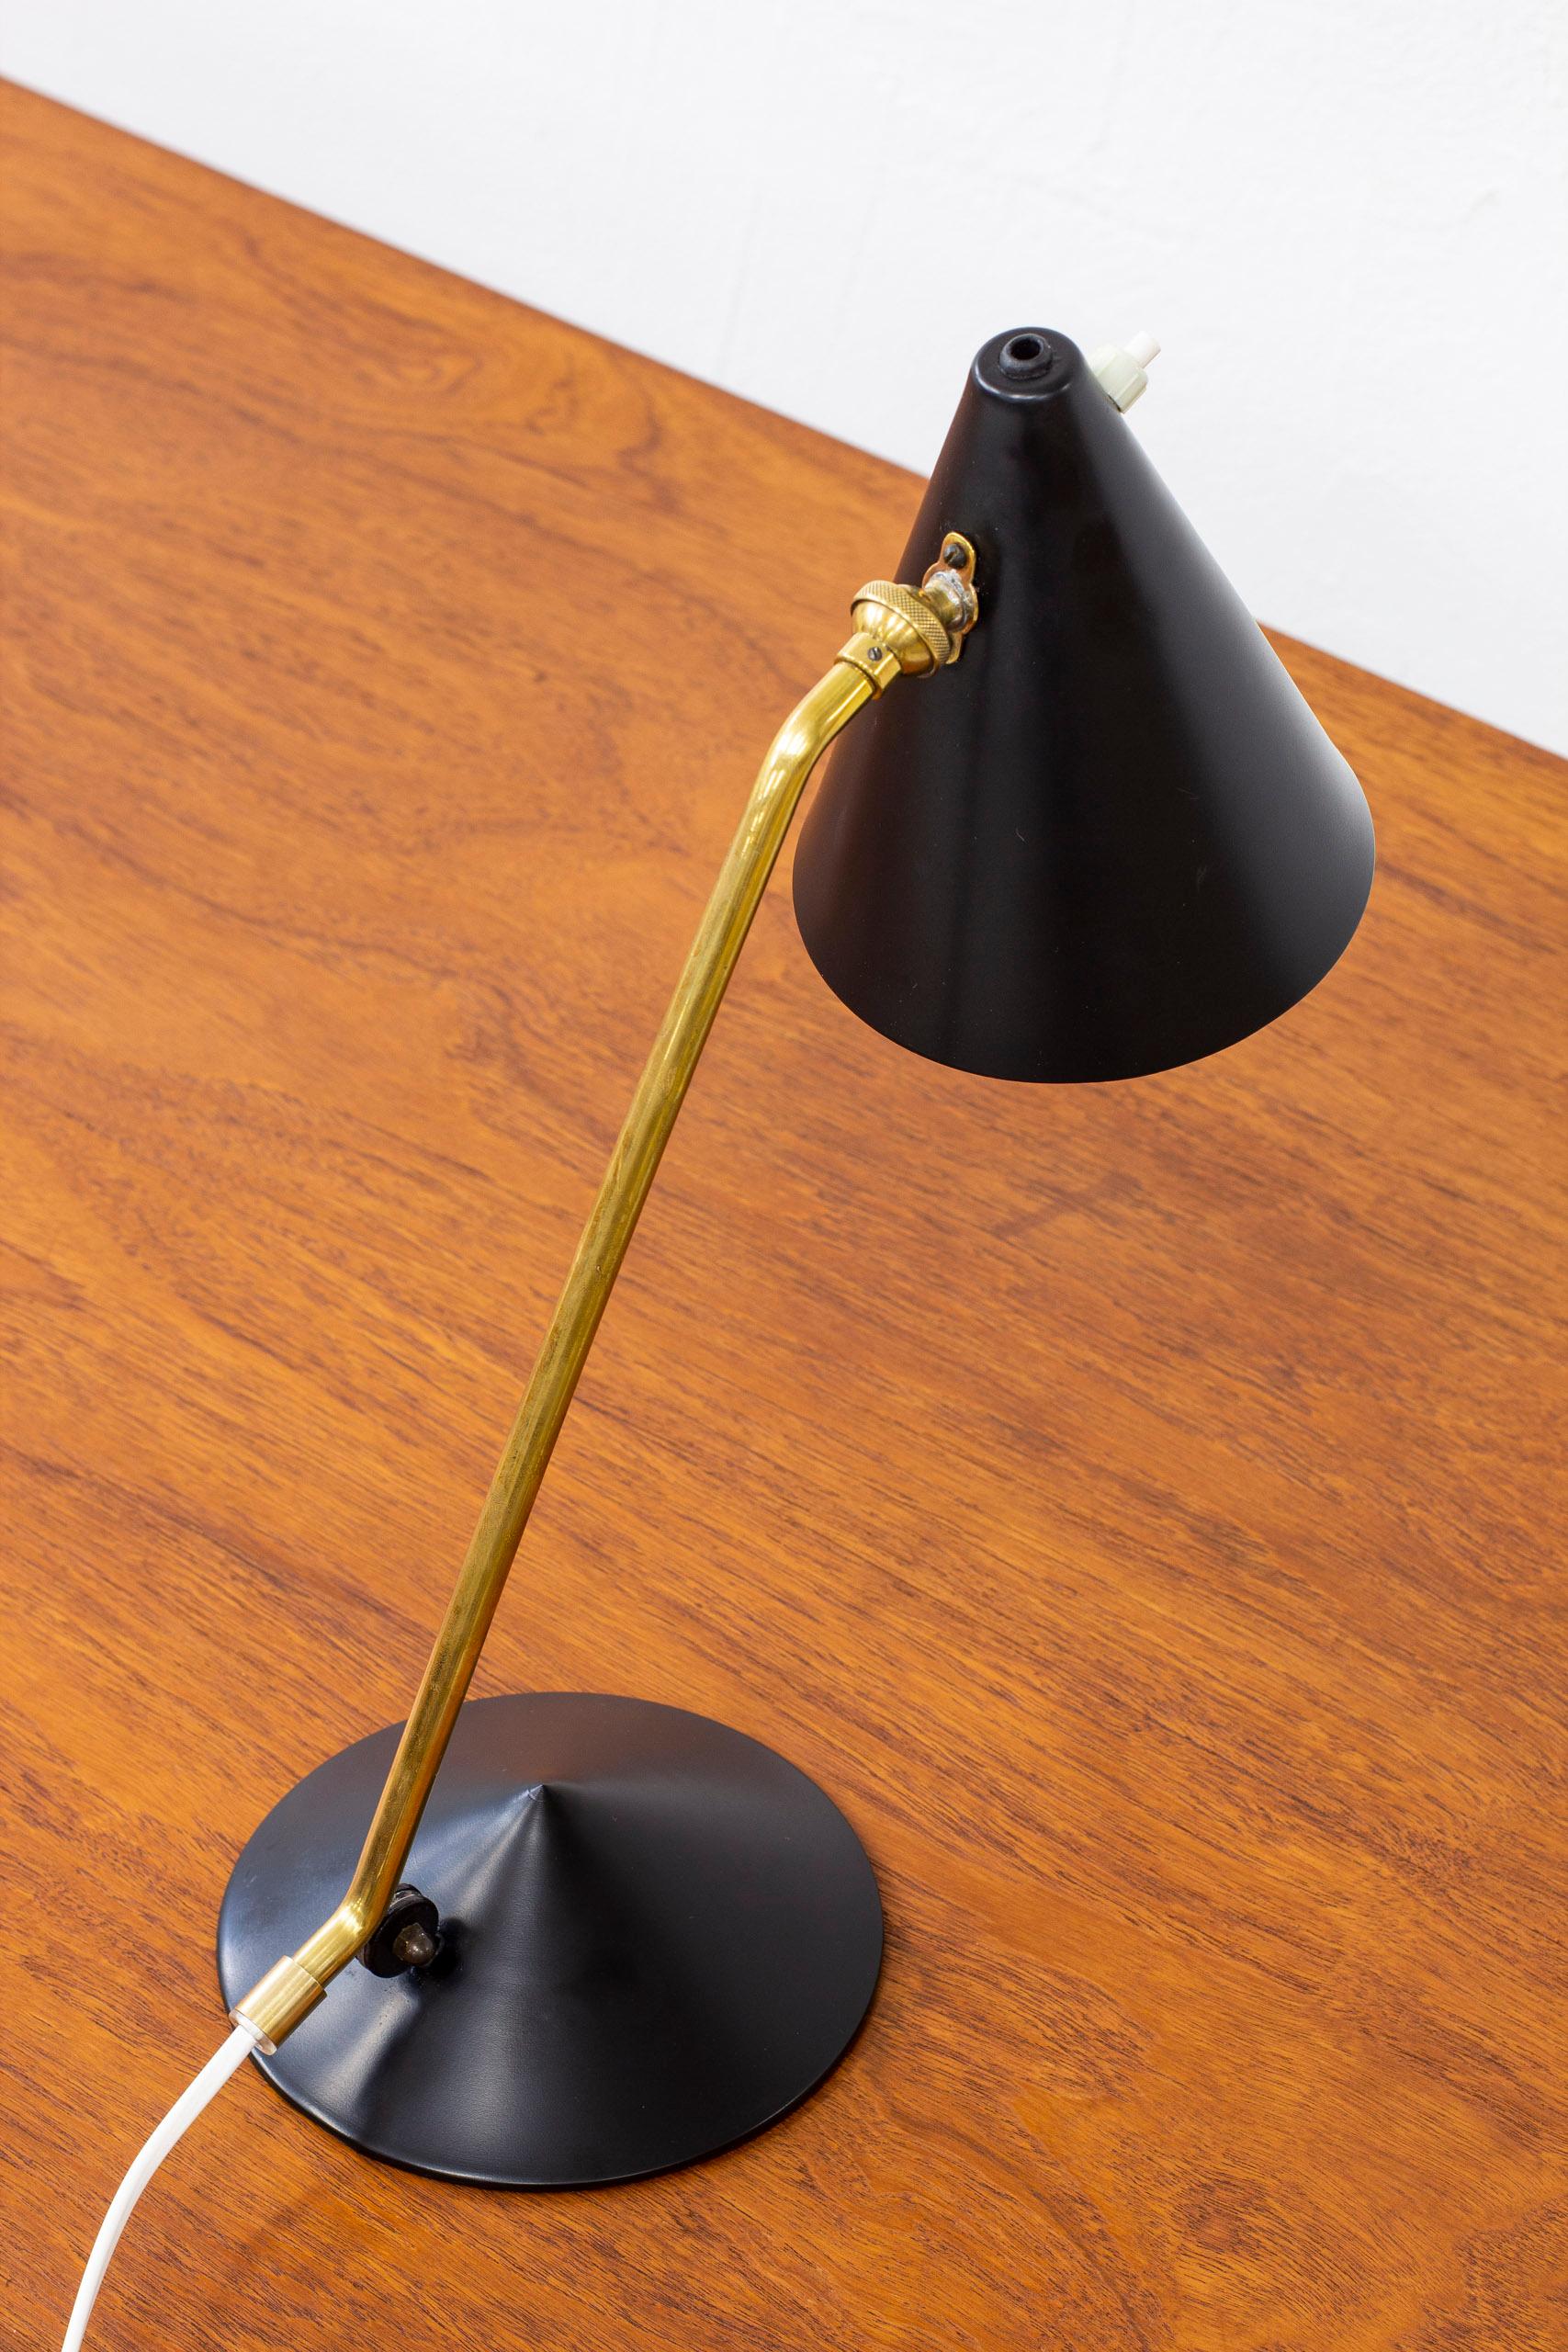 Danish Table Lamp Attributed to Svend Aage Holm Sørensen, Denmark, 1950s For Sale